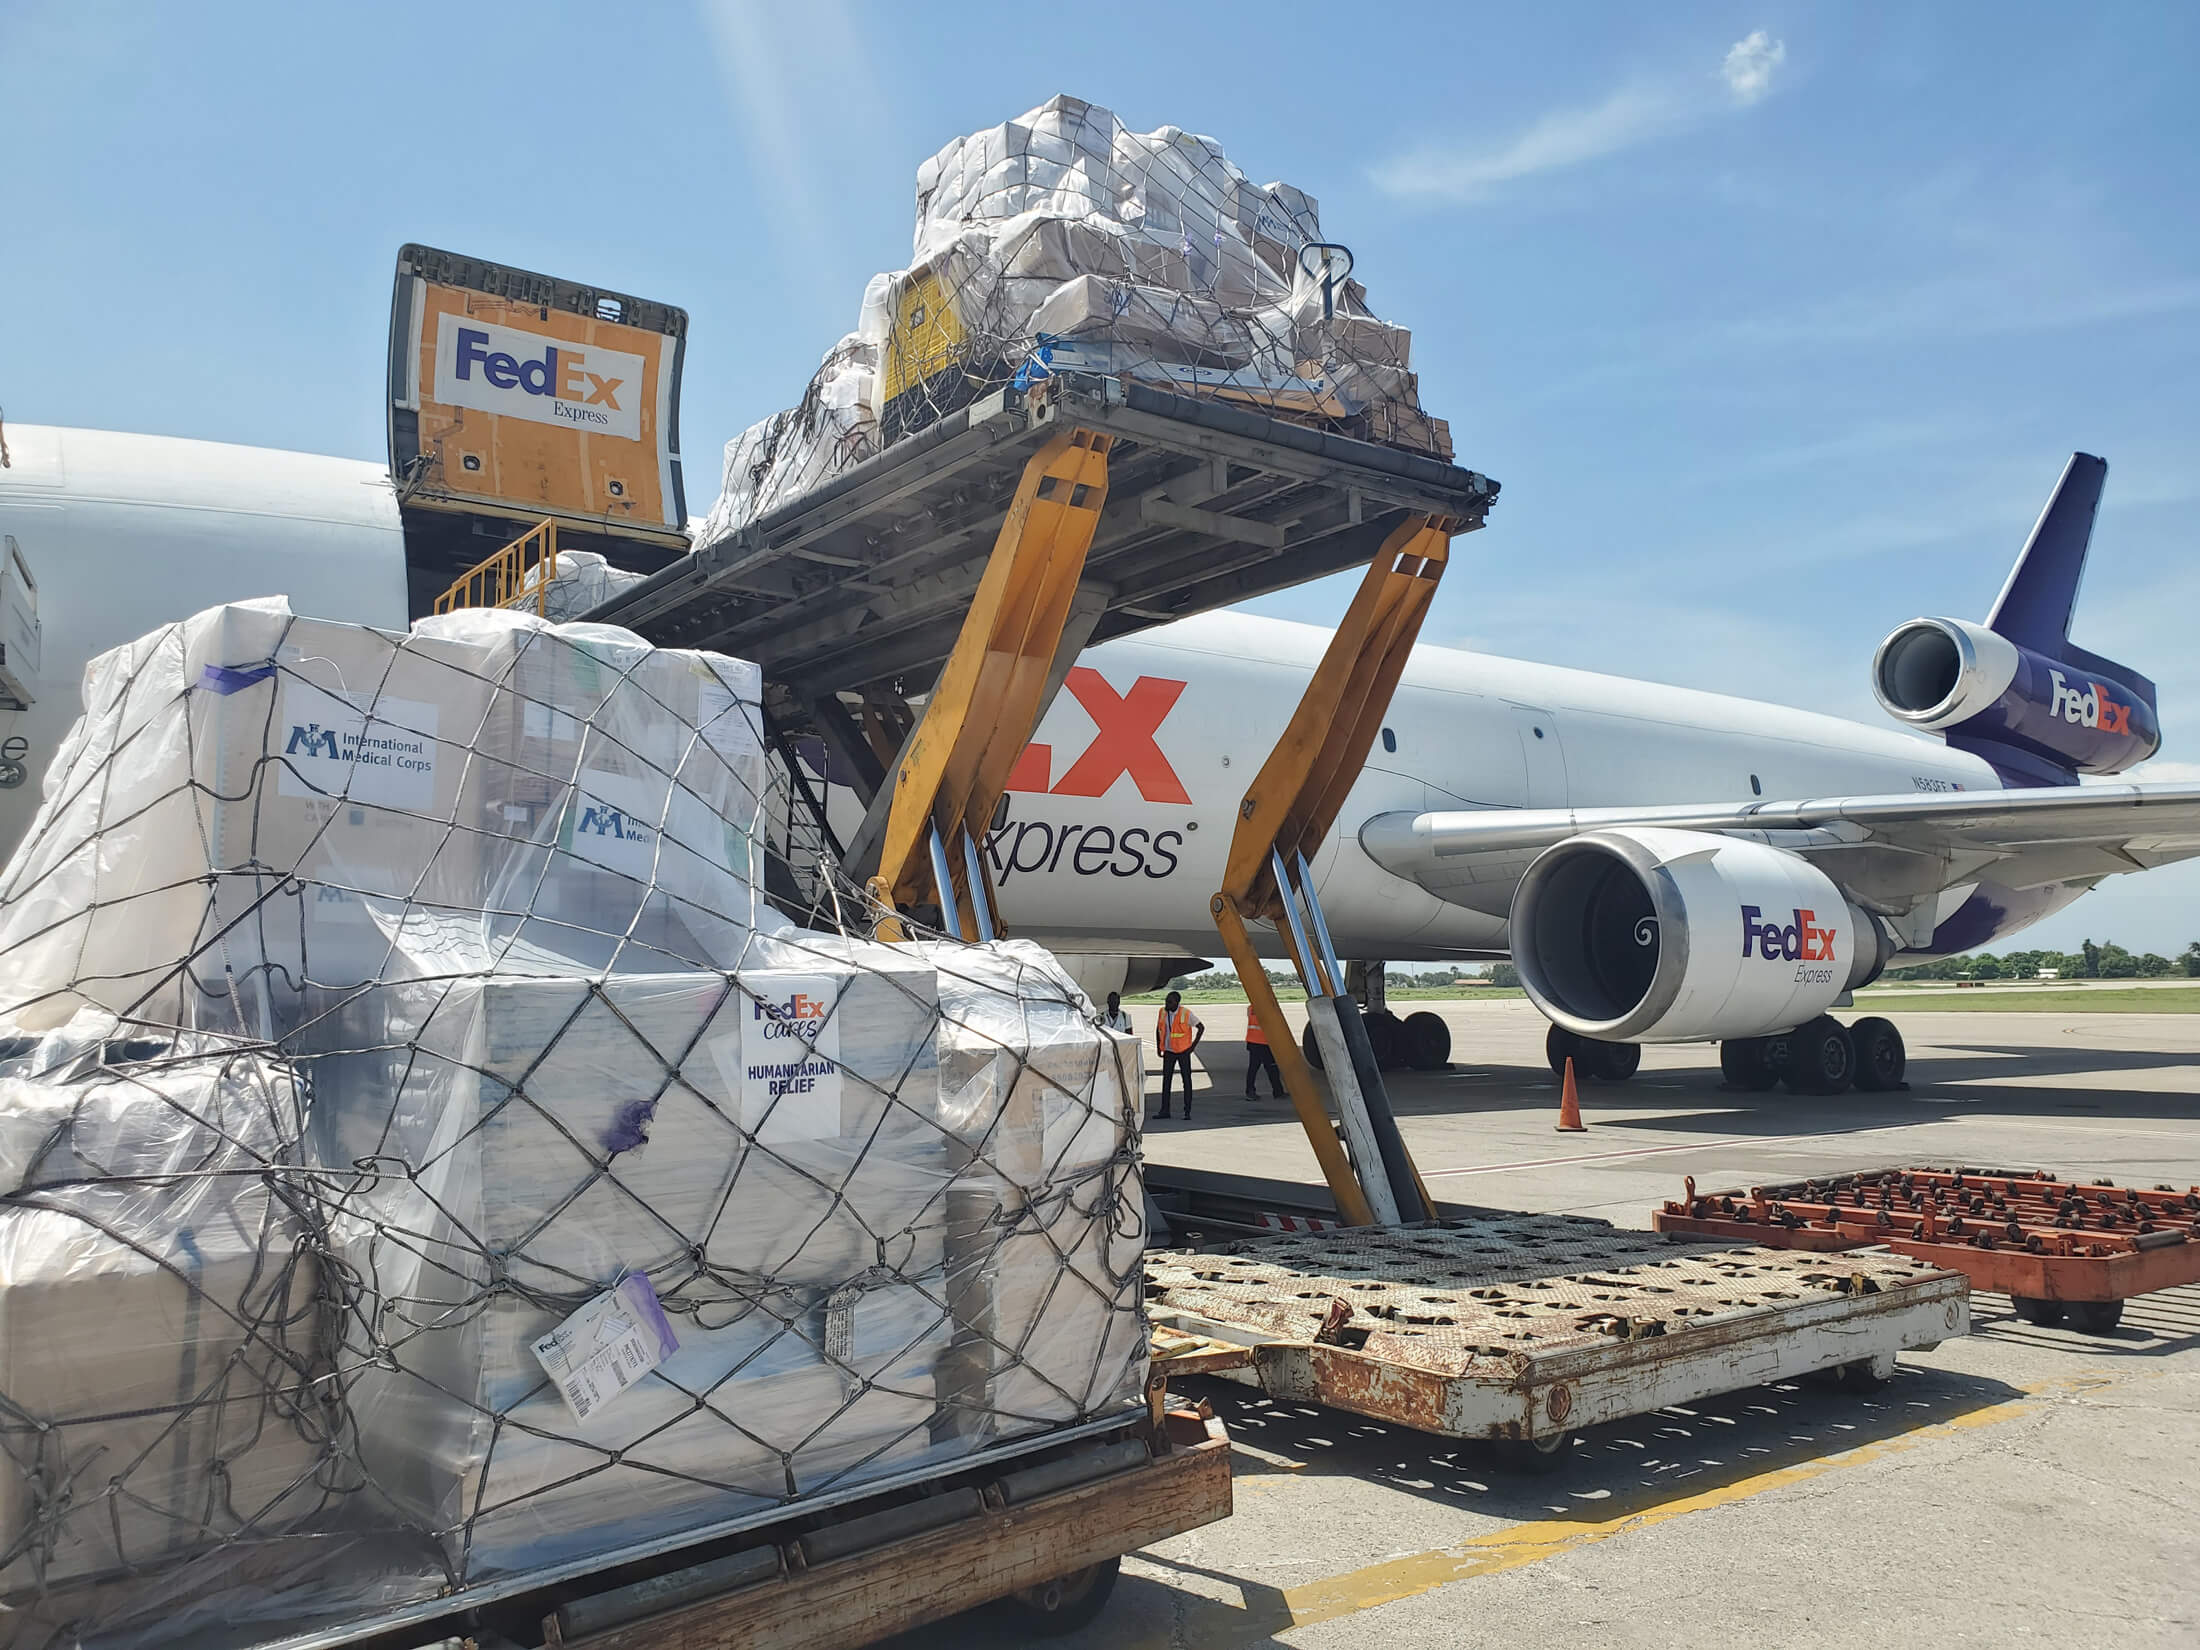 International Medical Corps' ongoing collaboration with FedEx is a key part of our ability to respond to emergencies worldwide.